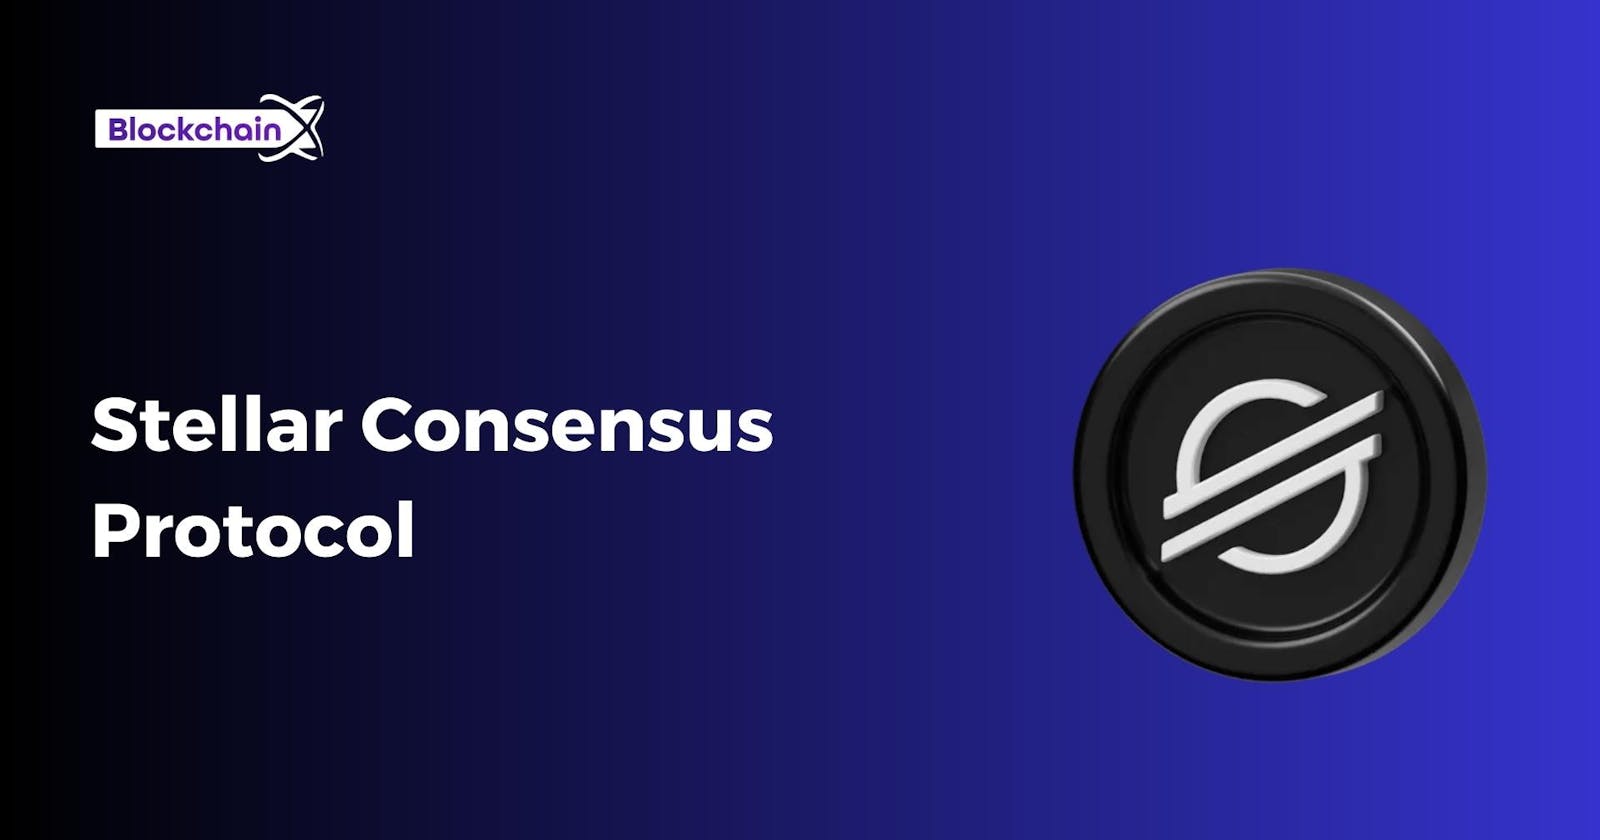 The Stellar Consensus Protocol: Enabling Secure and Decentralized Transactions on the Stellar Network